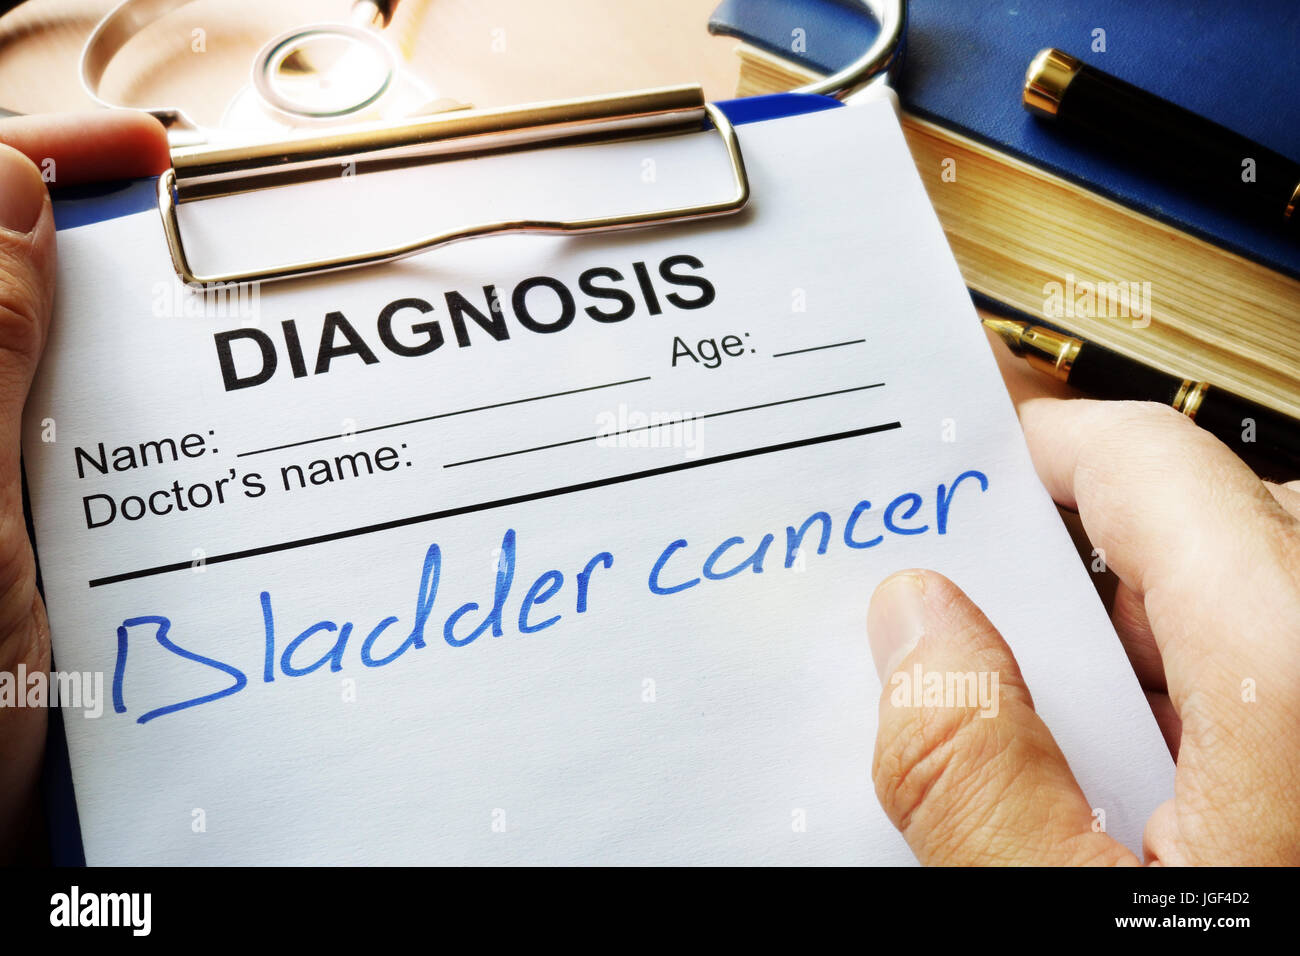 Diagnosis bladder cancer in a medical form. Stock Photo